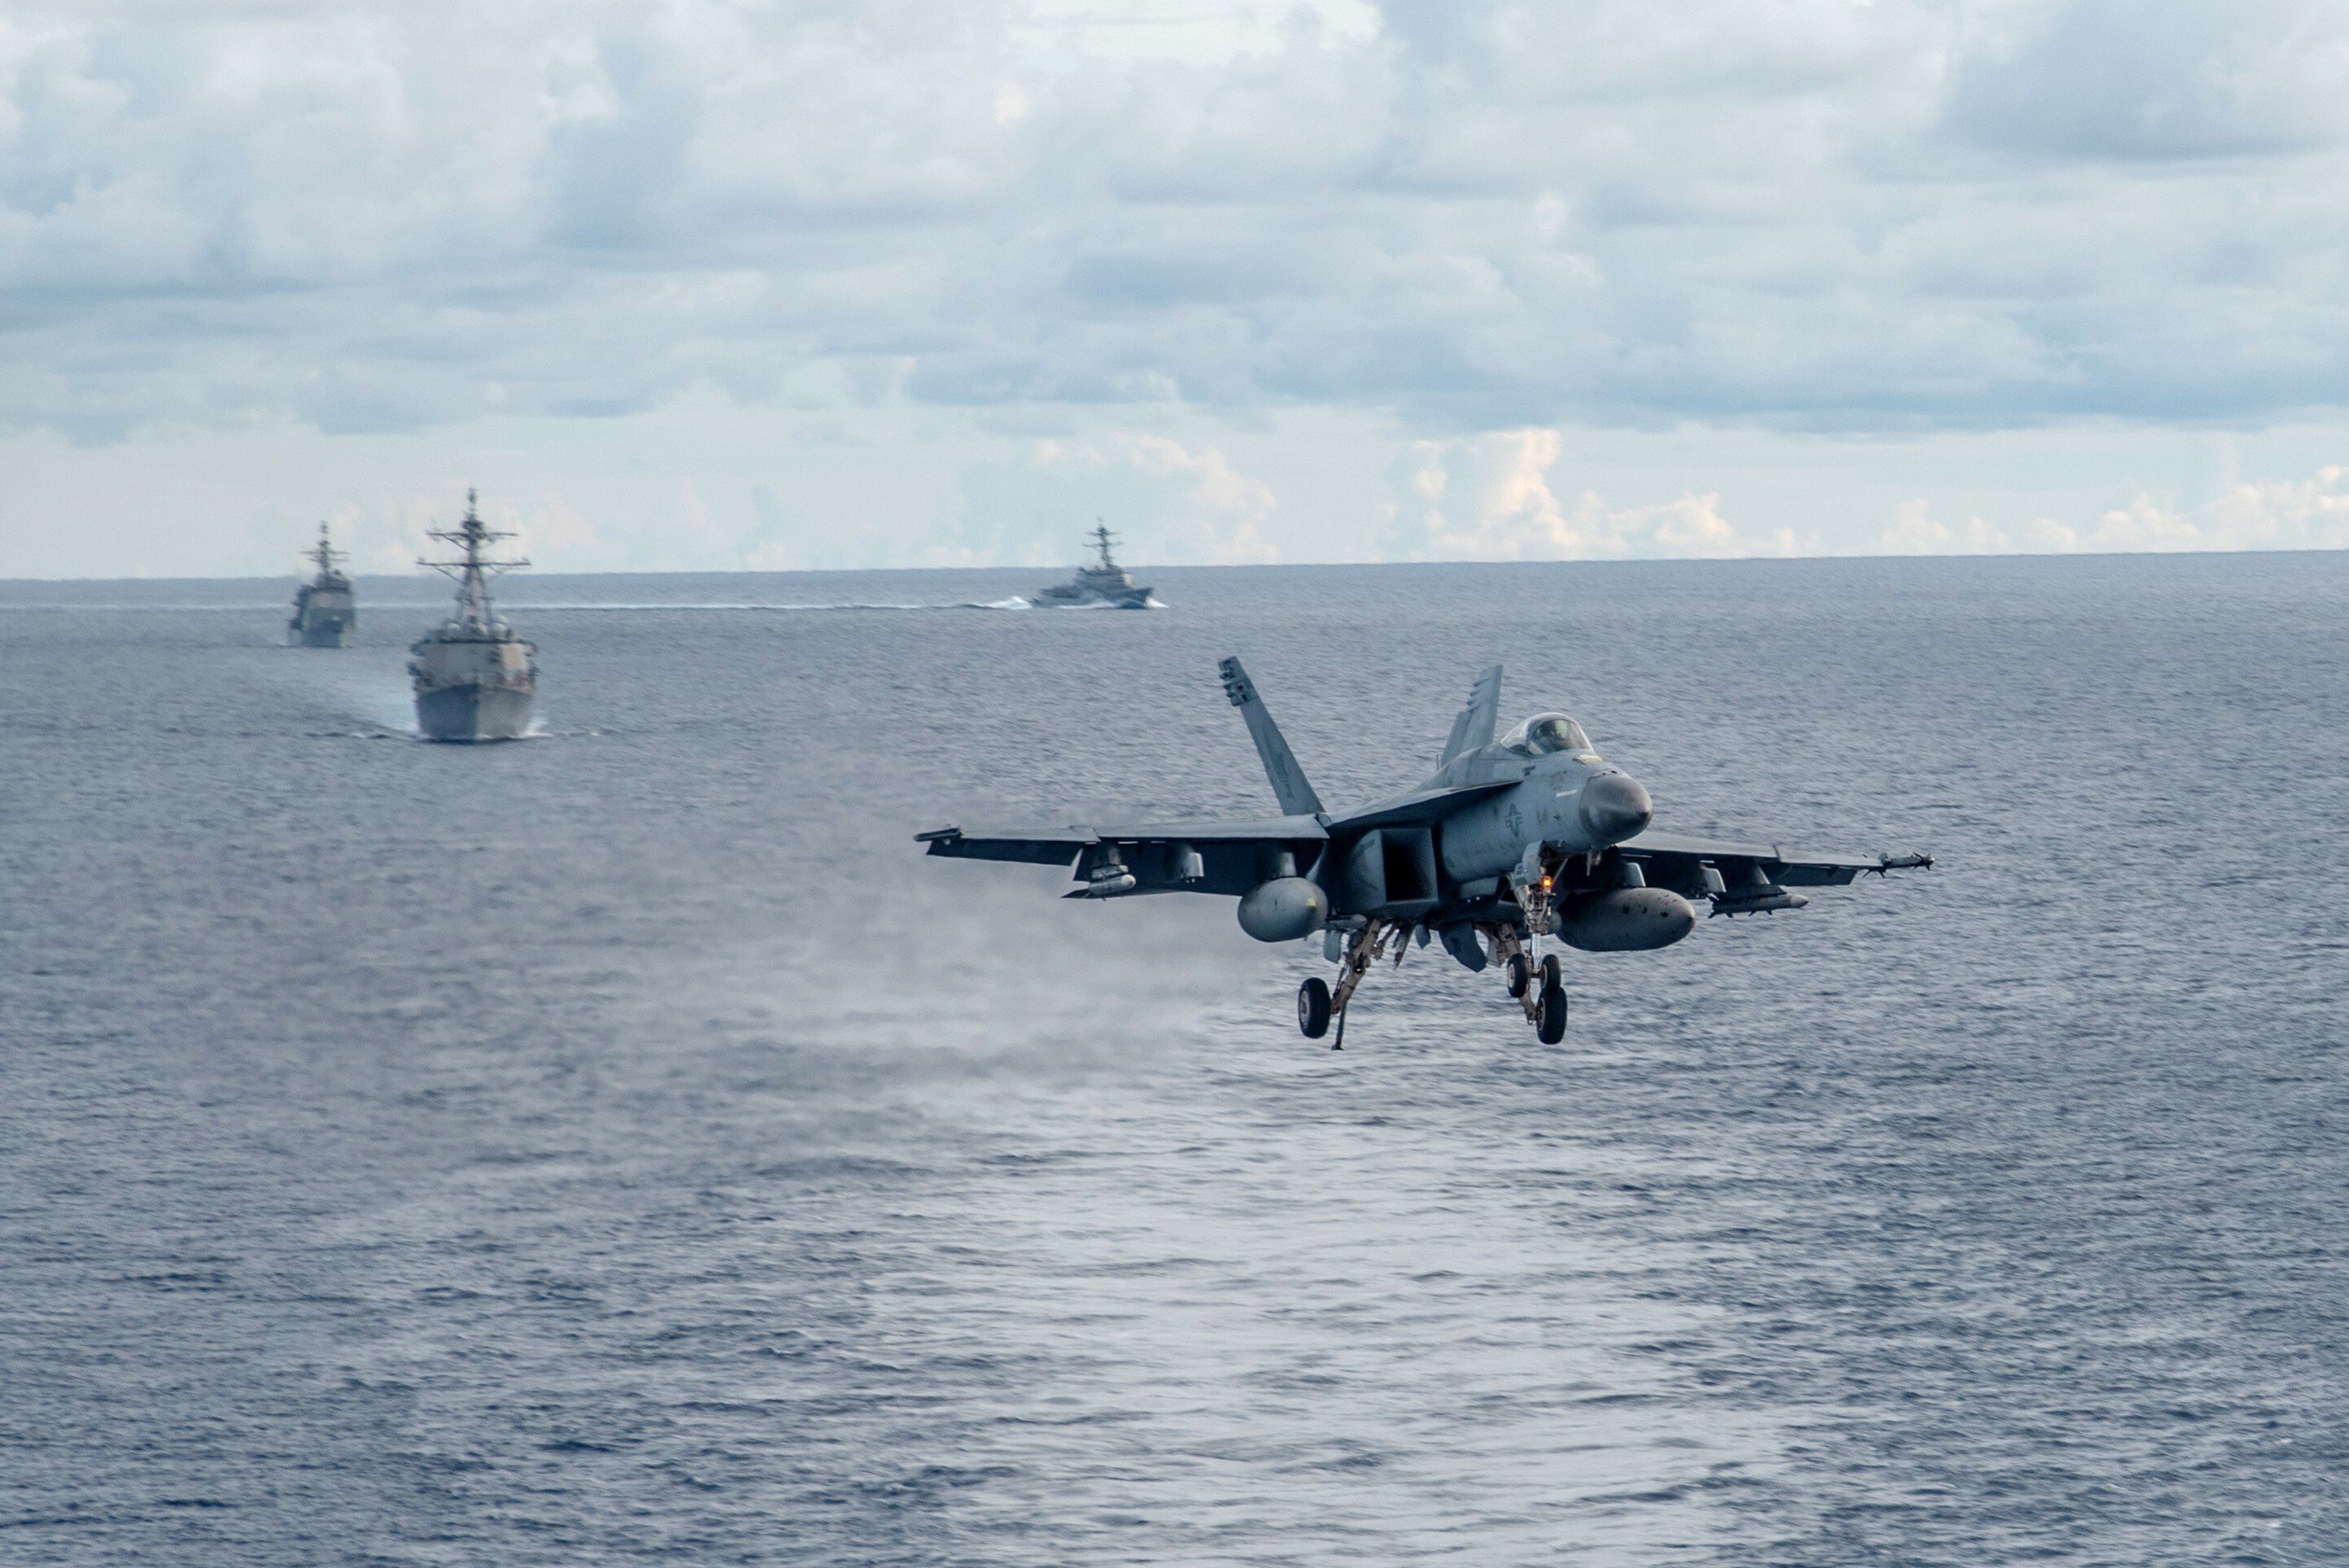 An F/A-18E Super Hornet approaches one of the two American aircraft carriers that have been conducting exercises in the South China Sea. Photo: EPA